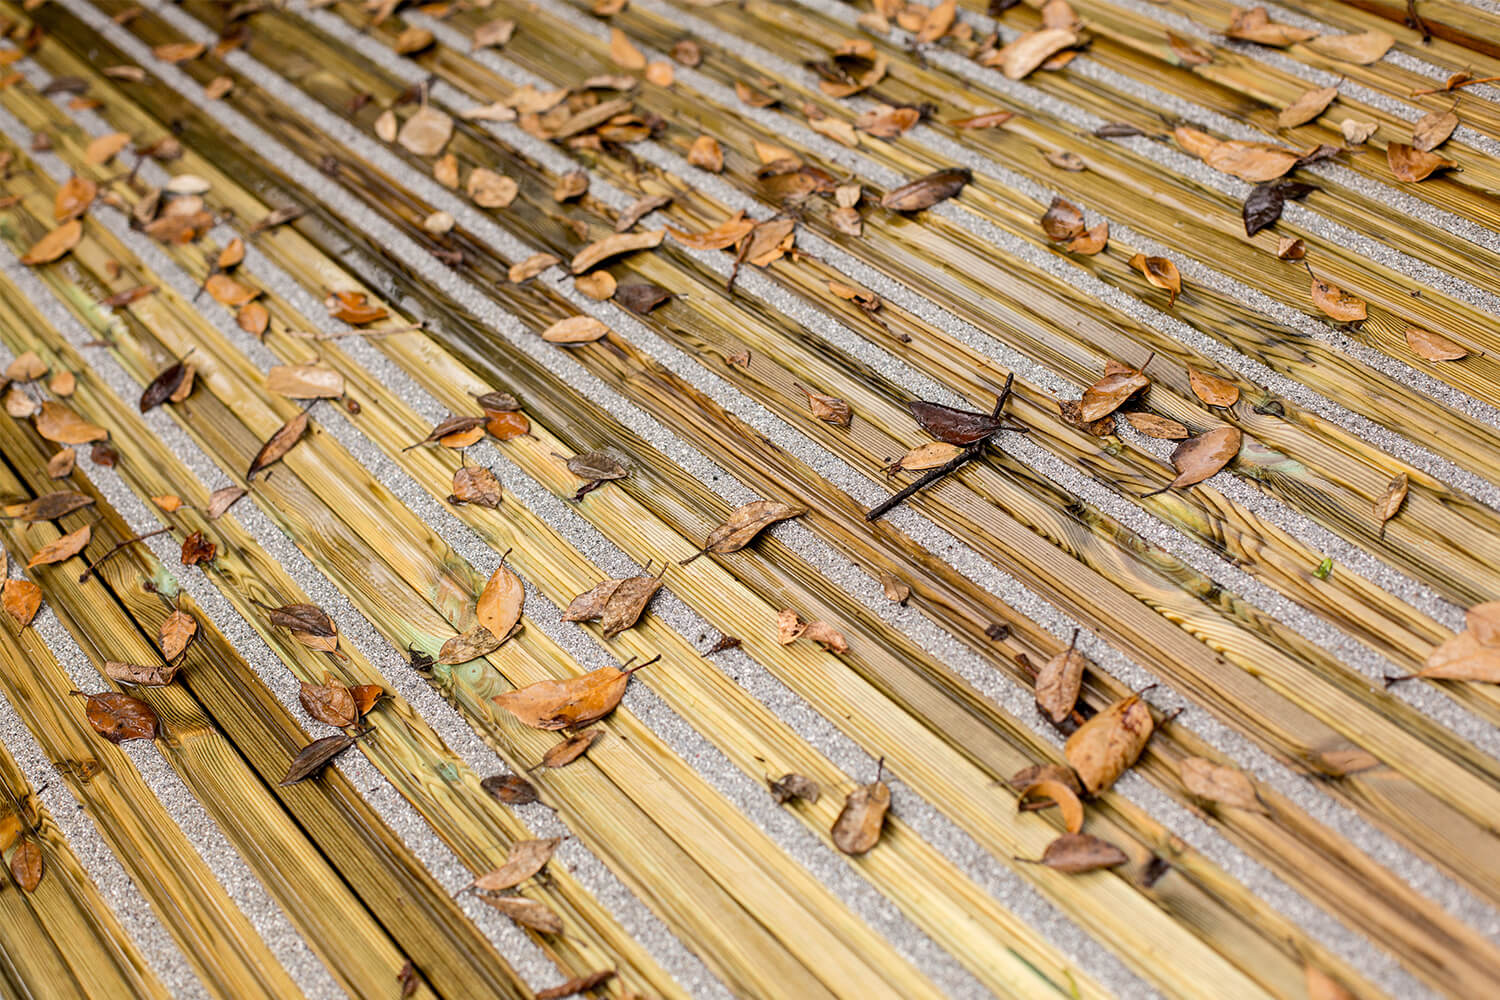 Anti-slip timber deck boards covered in Autumn leaves